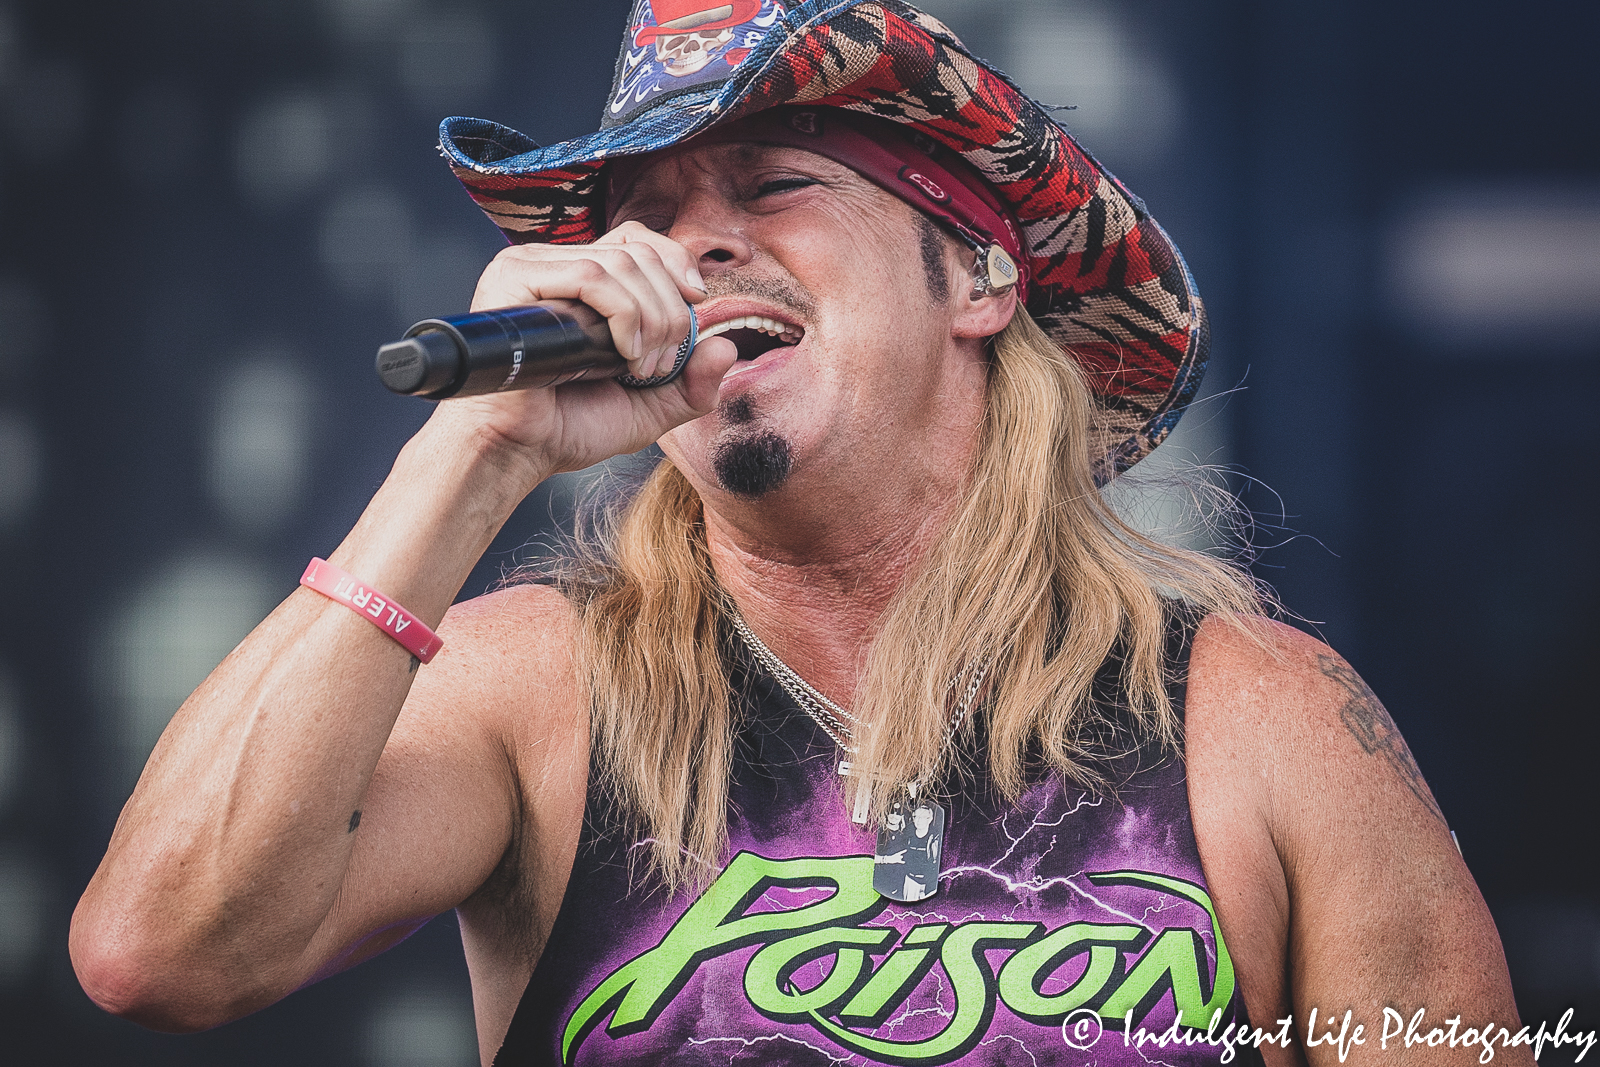 Frontman Bret Michaels of Poison live in concert during the stadium tour stop at Kauffman Stadium in Kansas City, MO on July 19, 2022.